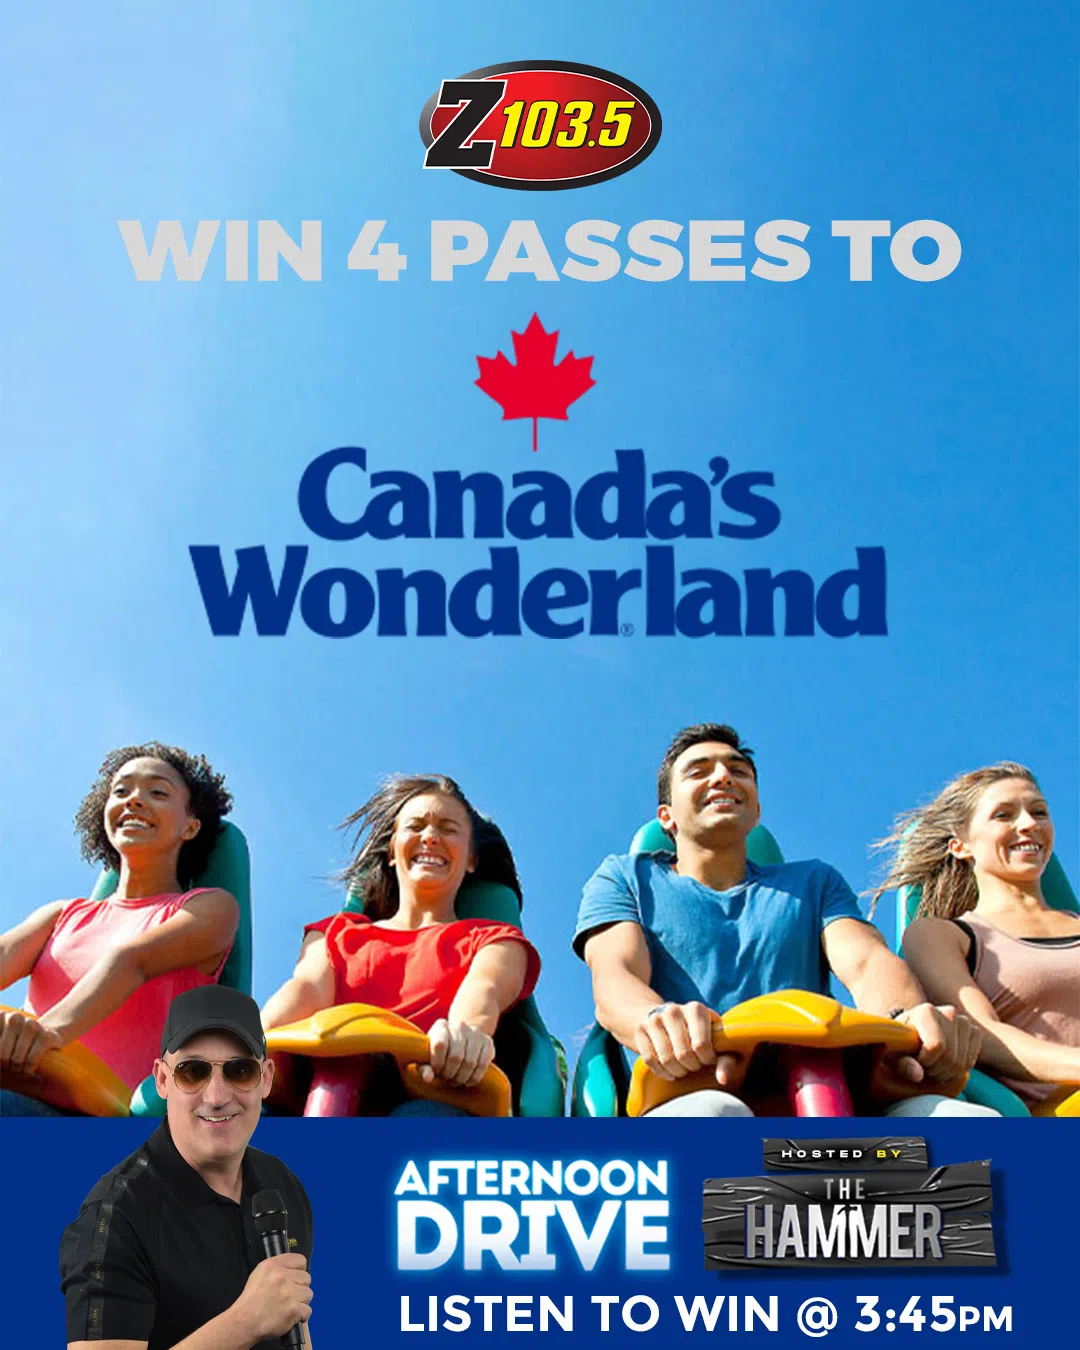 Feature: https://z1035.com/win/listen-to-win-a-four-pack-of-tickets-to-canadas-wonderland/